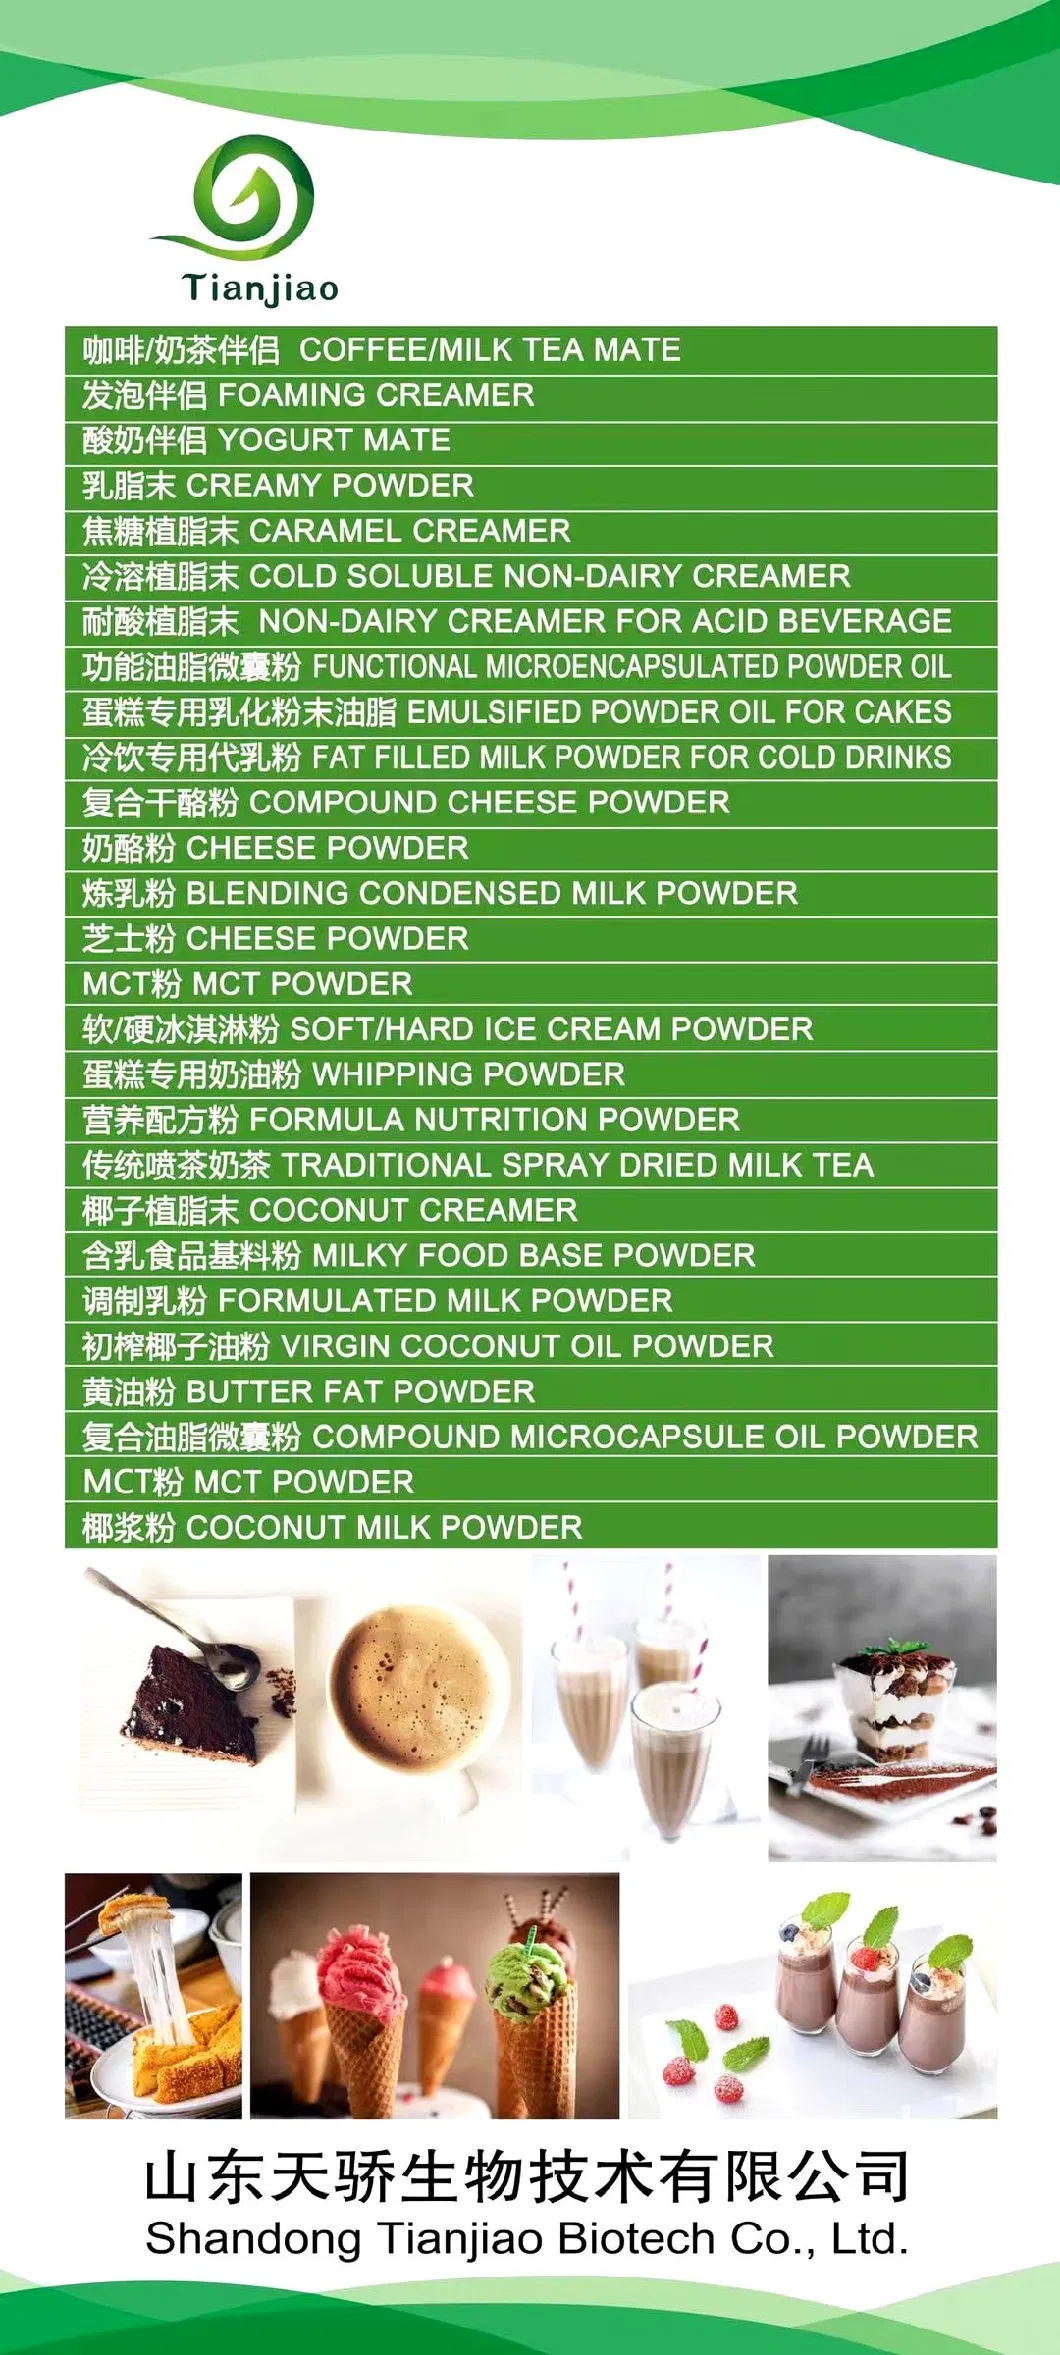 Bullet Proof Coffee Ingredients- Mct Oil Powder for Nutritional Supplement